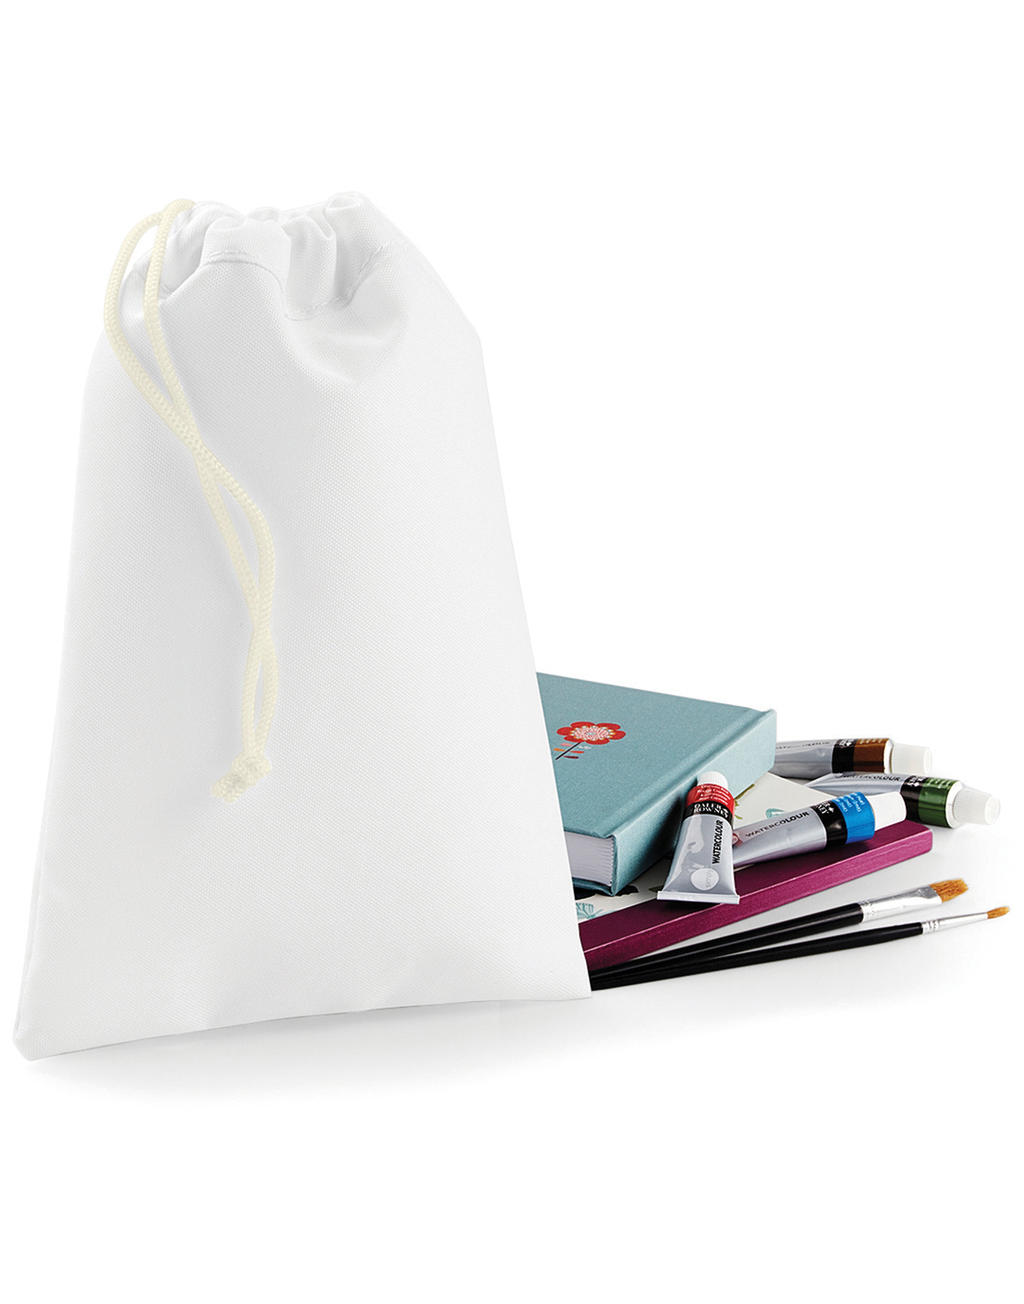  Sublimation Stuff Bag in Farbe White